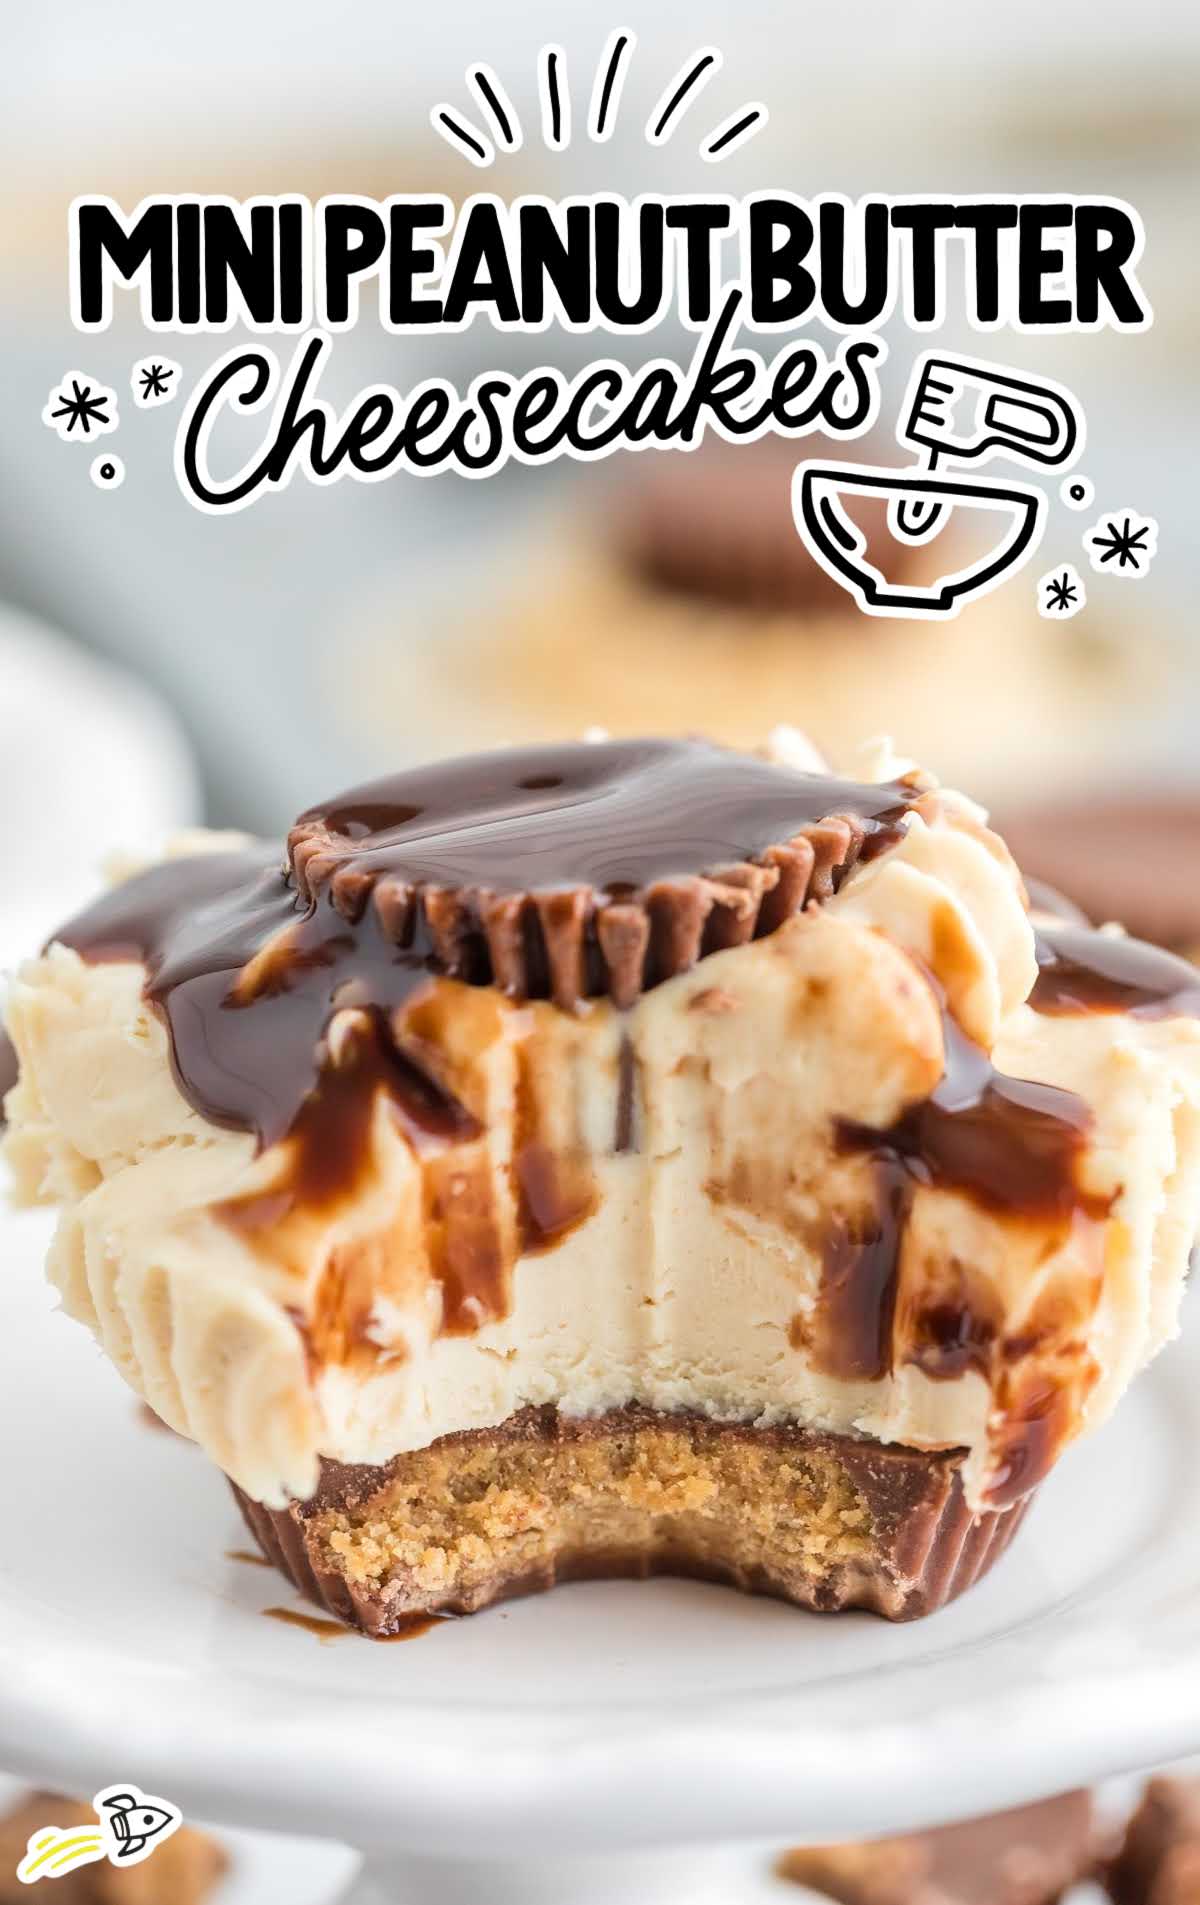 a close up shot of a Mini Peanut Butter Cheesecake drizzled with chocolate sauce and a bite taken out of it